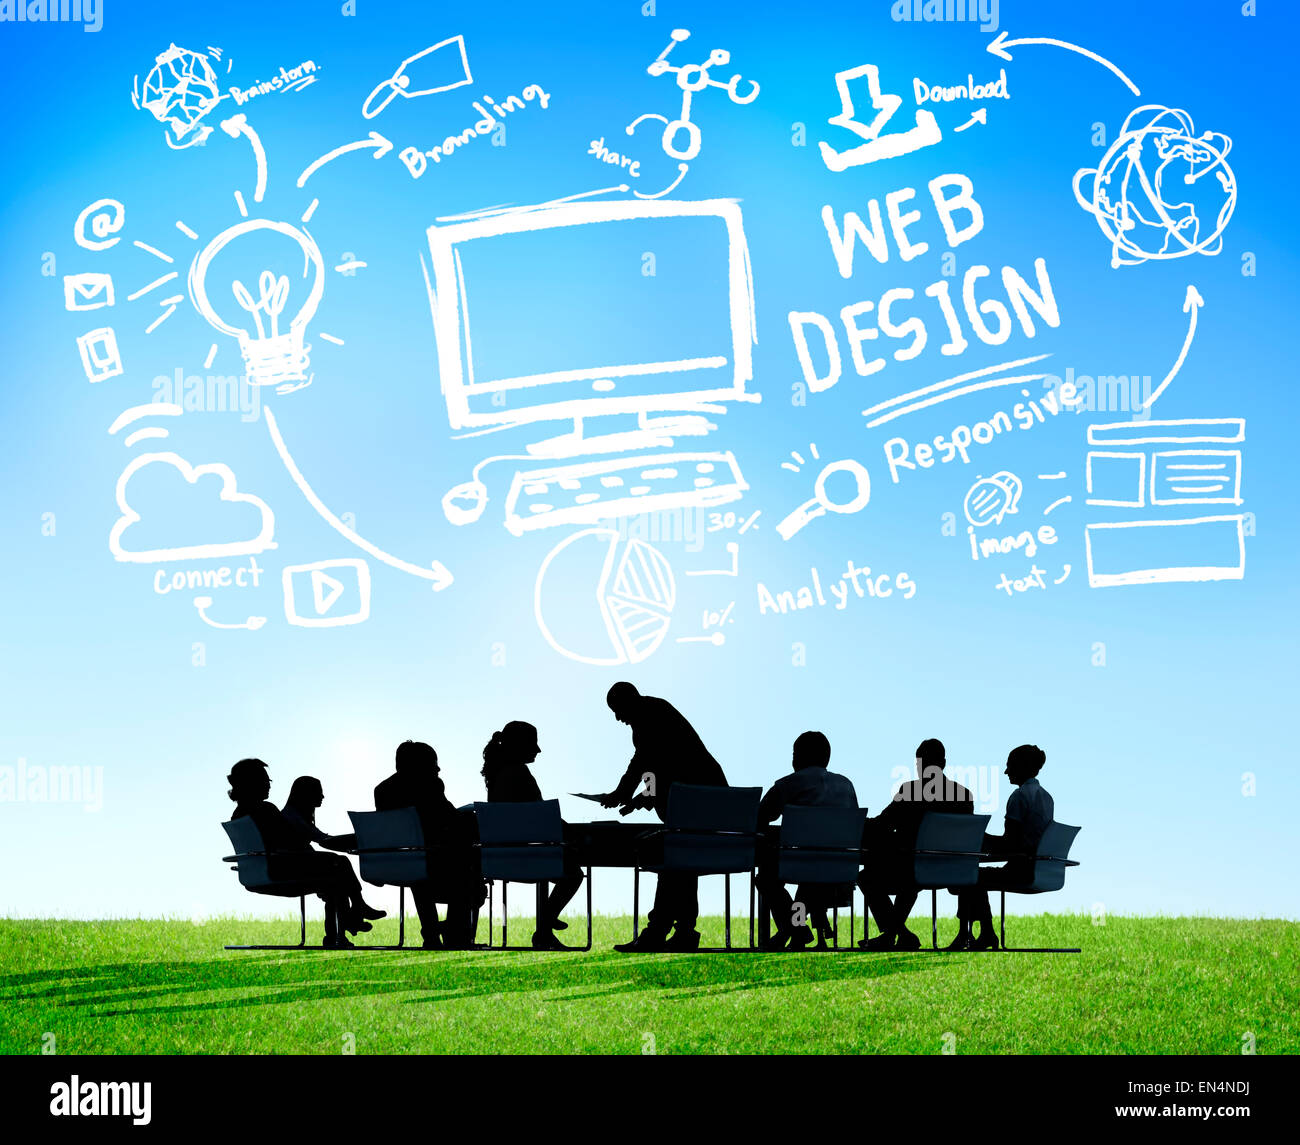 Content Creativity Digital Graphic Layout Webdesign Webpage Concept Stock Photo